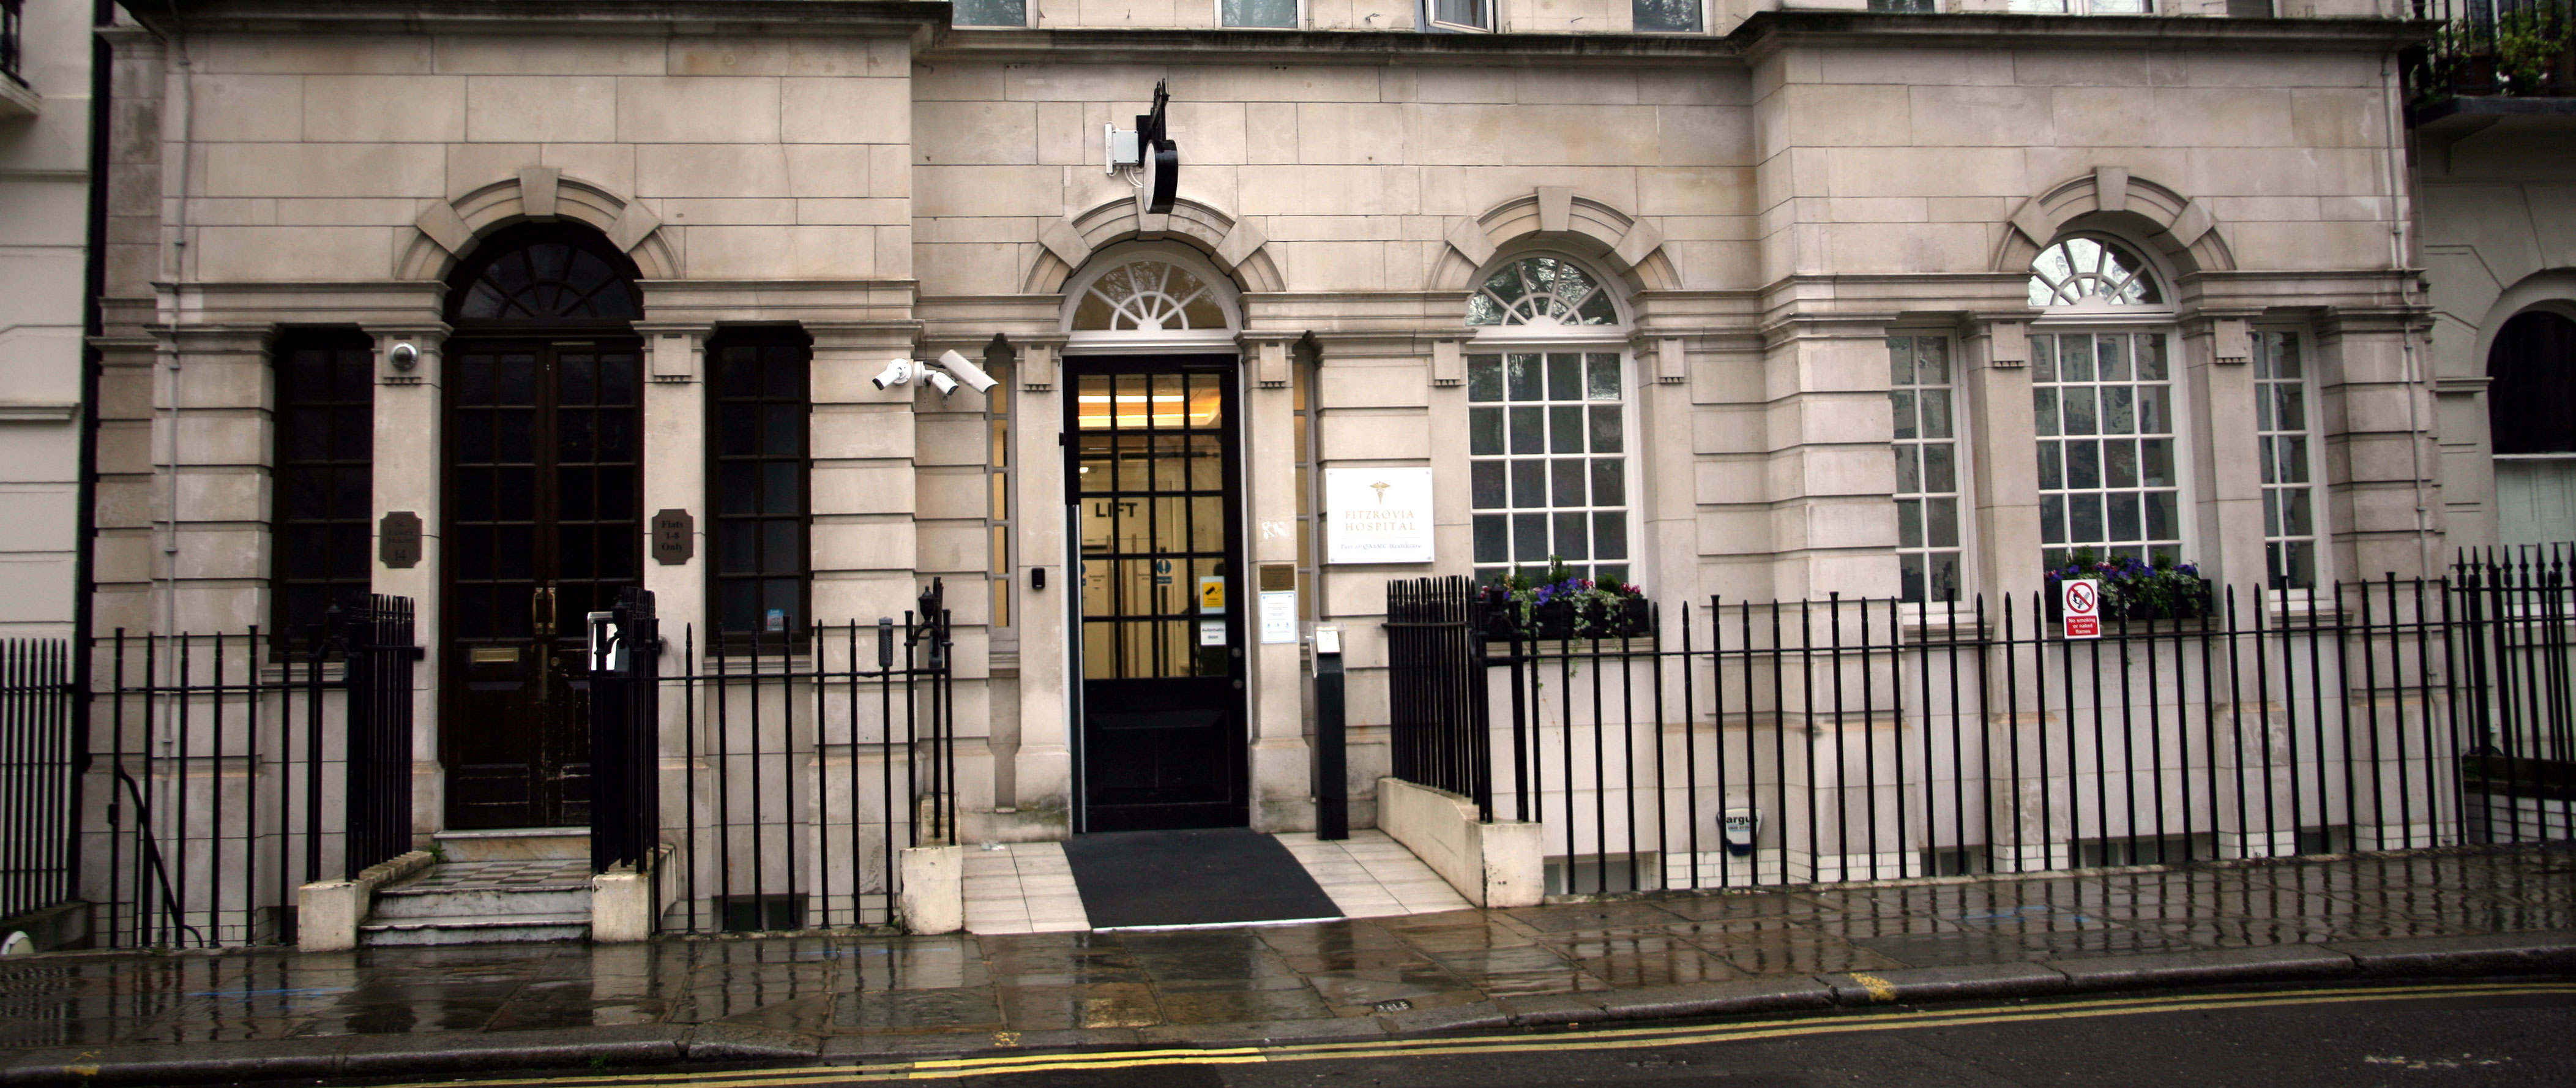 The Fitzrovia Hospital in the Harley Street district of London